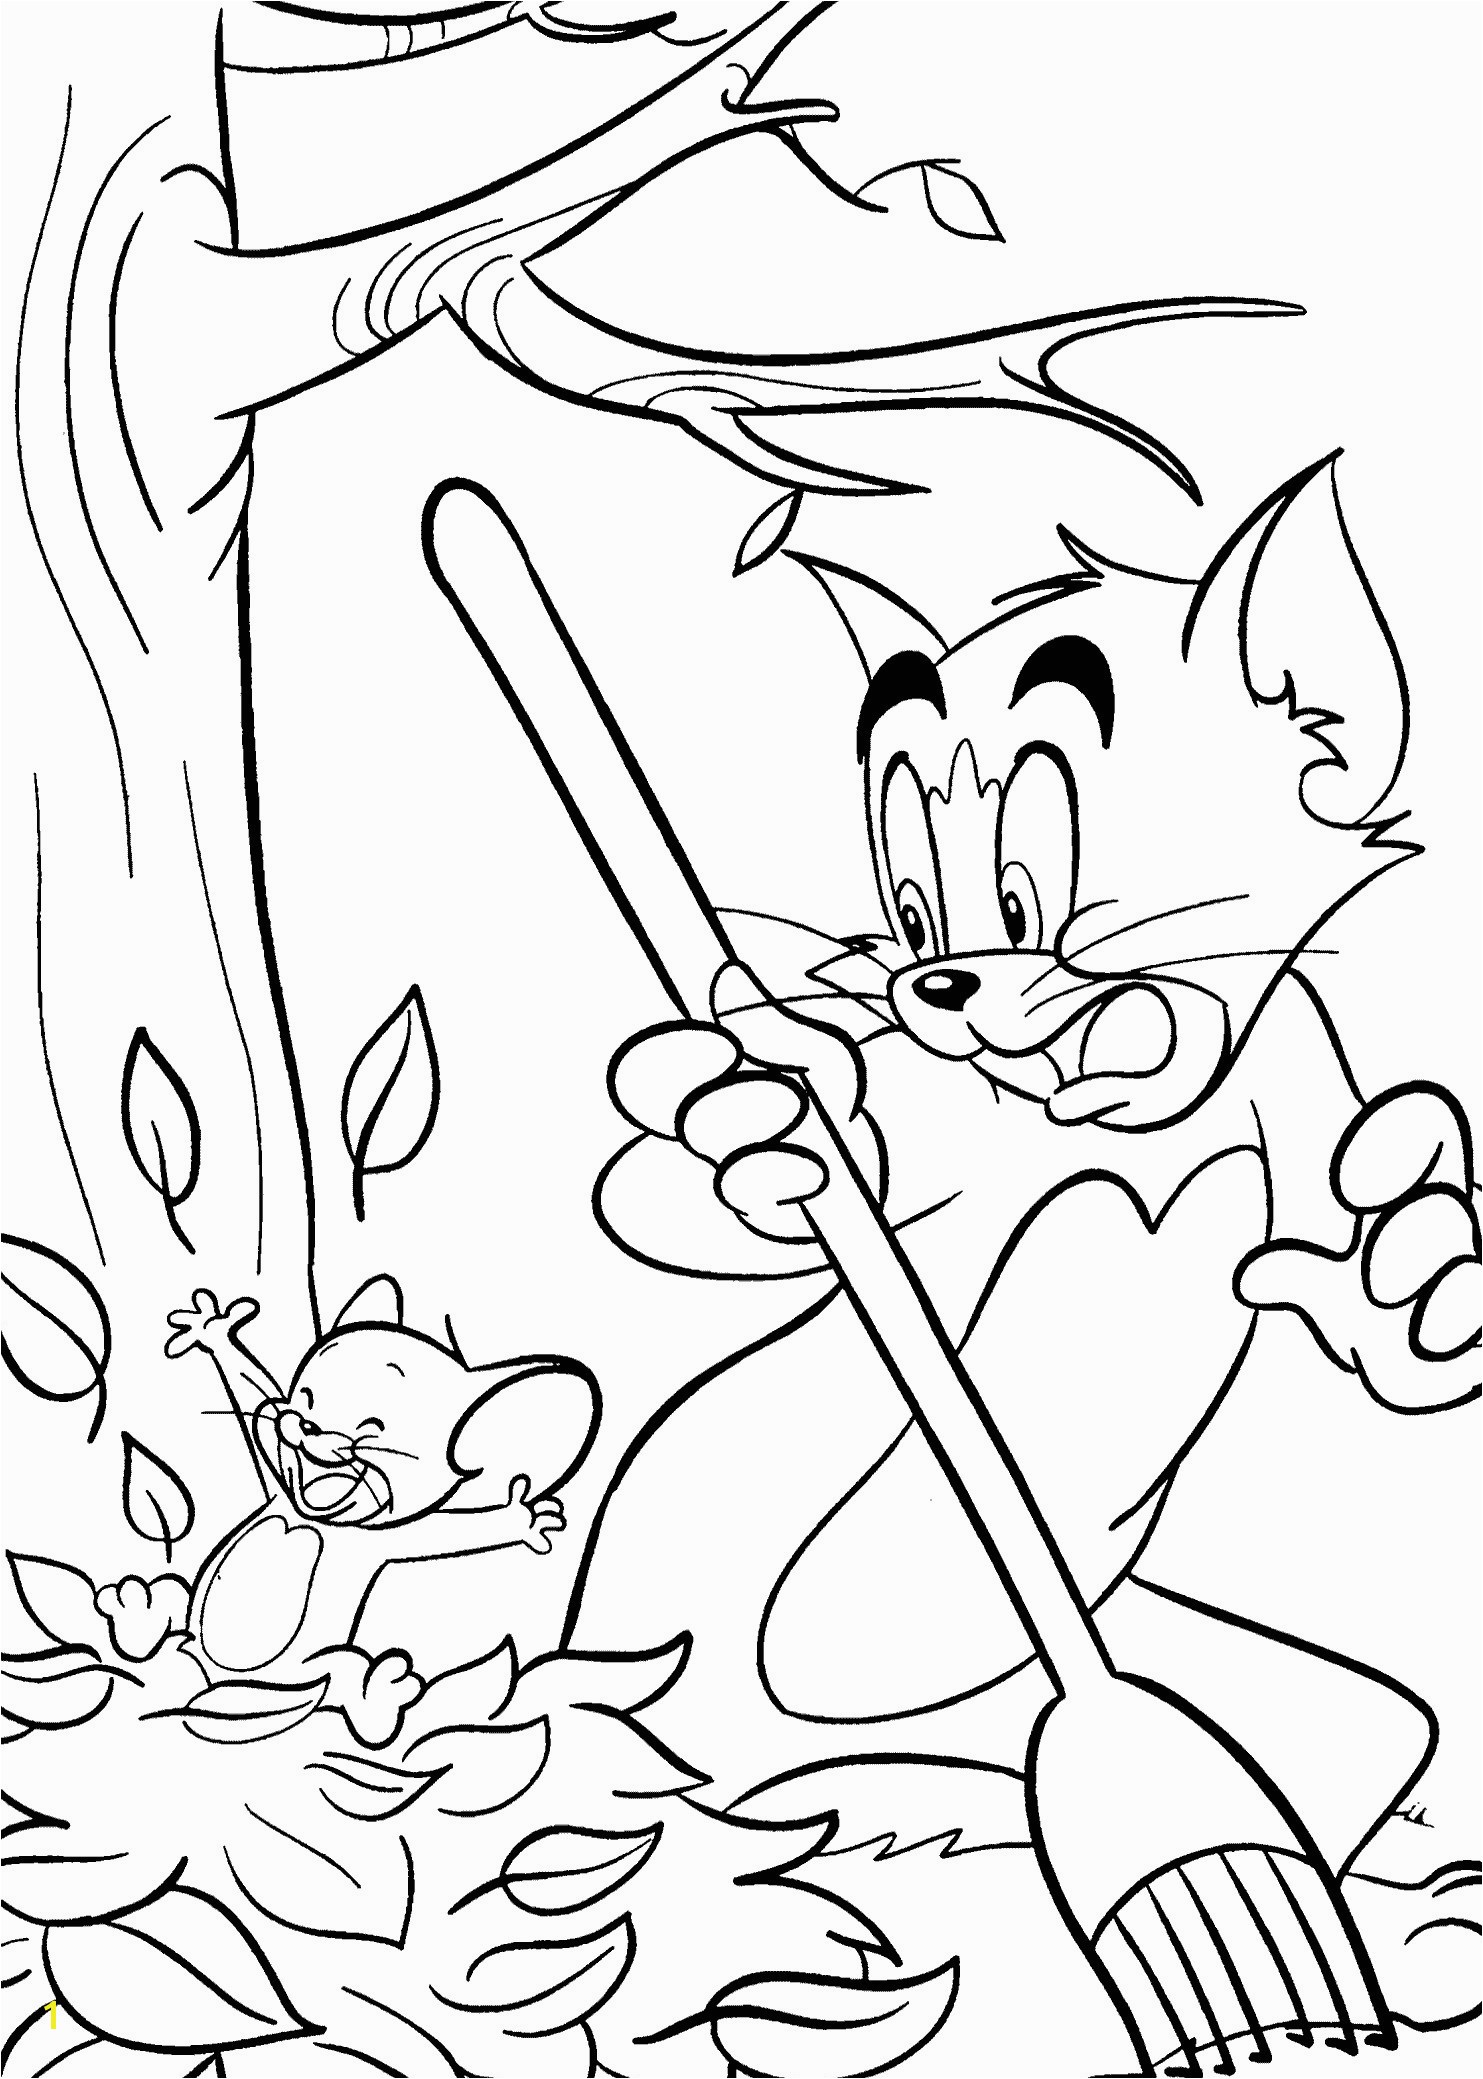 15 Fresh Www Coloring Pages for Kids Image